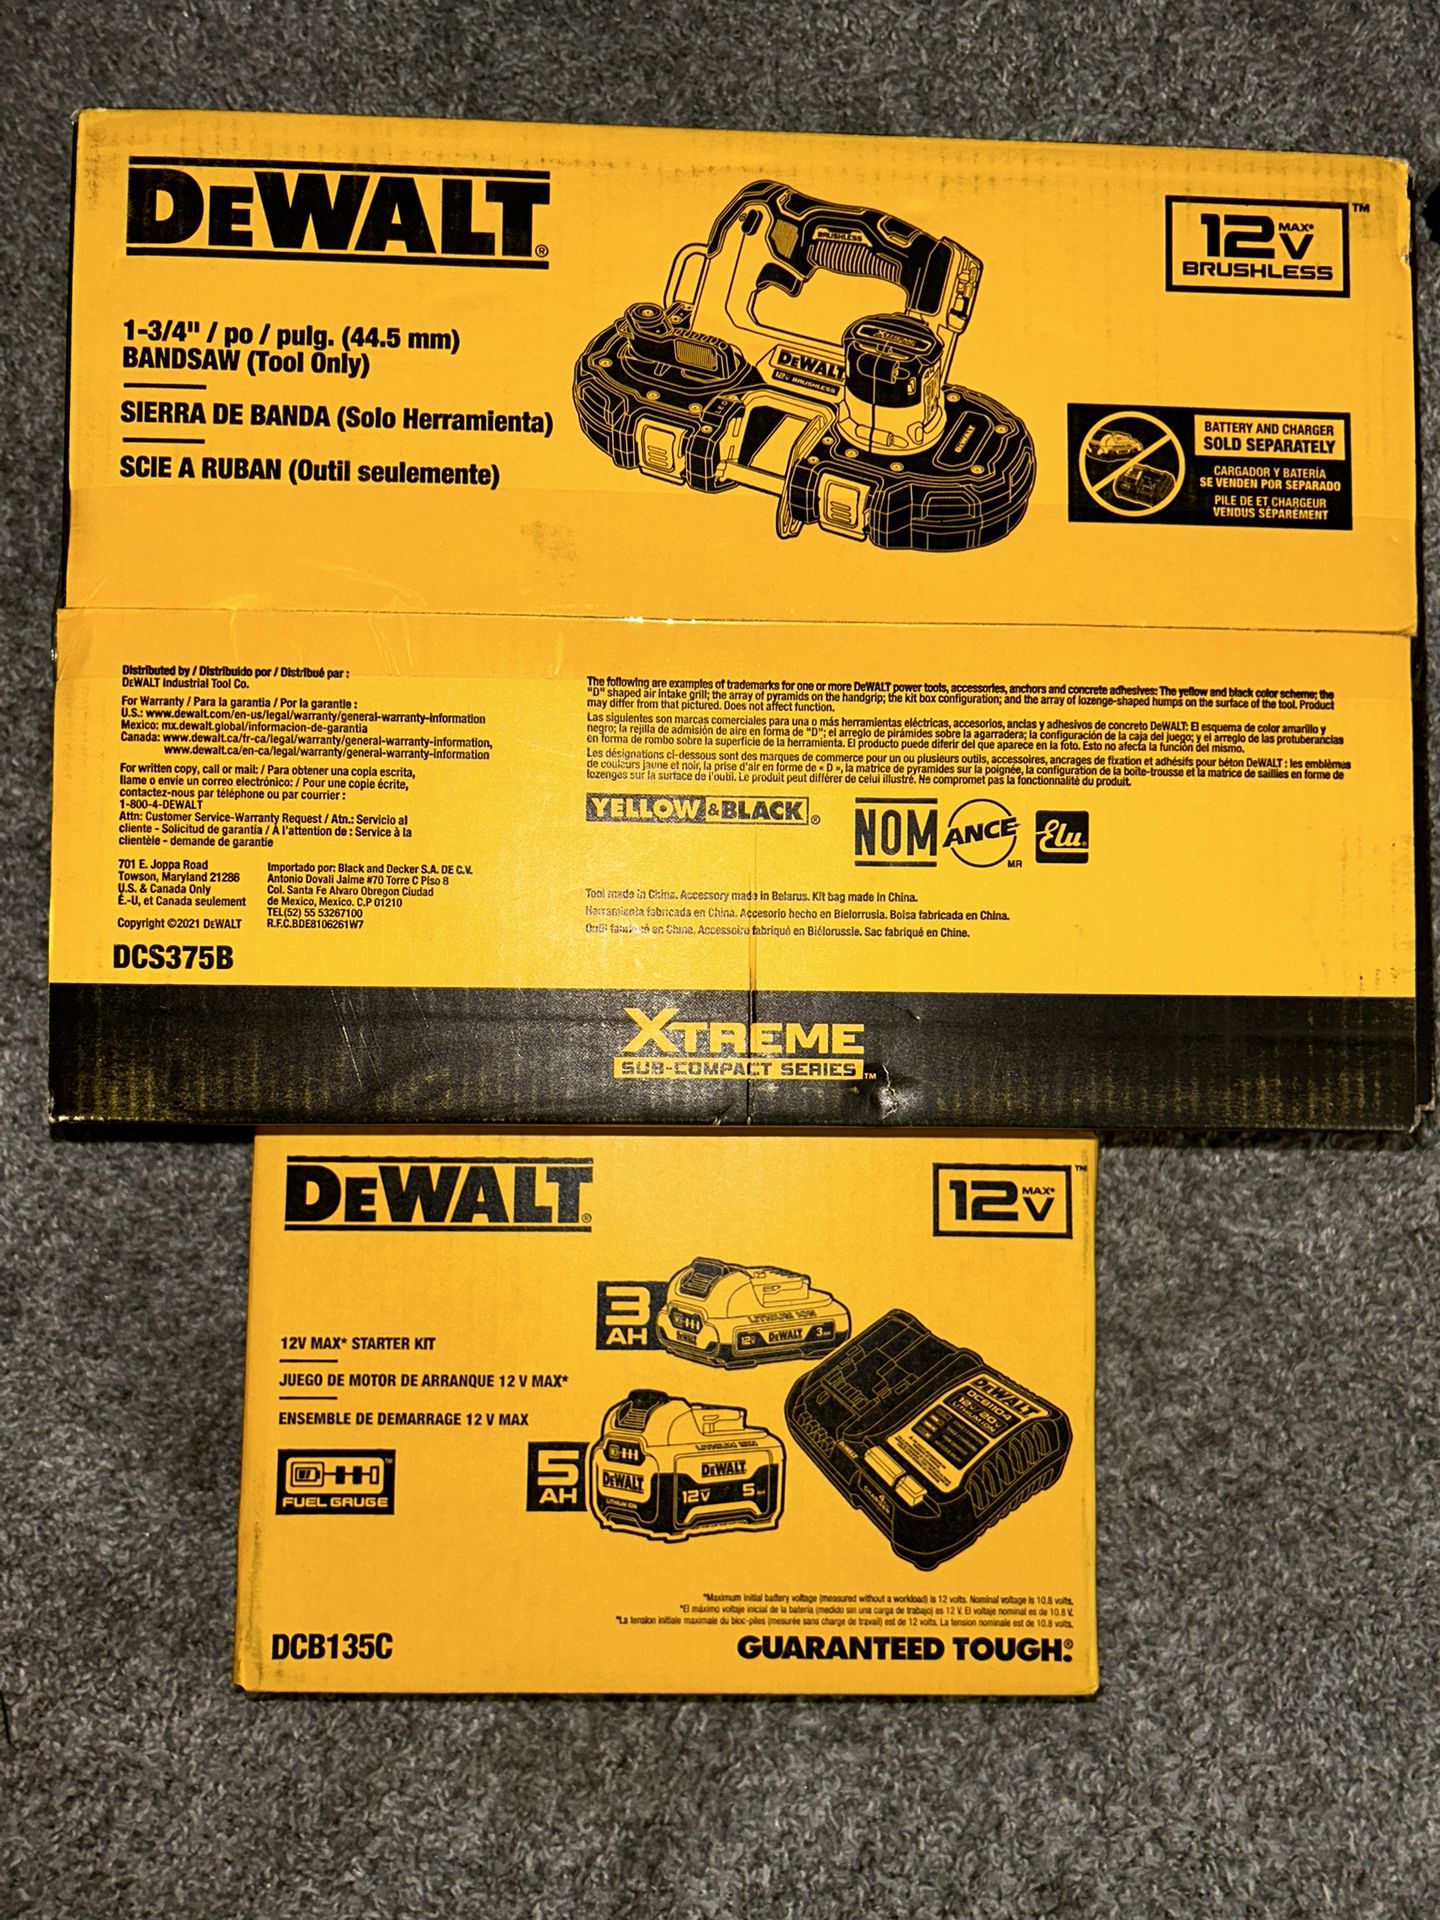 Career Cut off undertake Band Saw And Batteries Dewalt 12v for Sale in Houston, TX - OfferUp